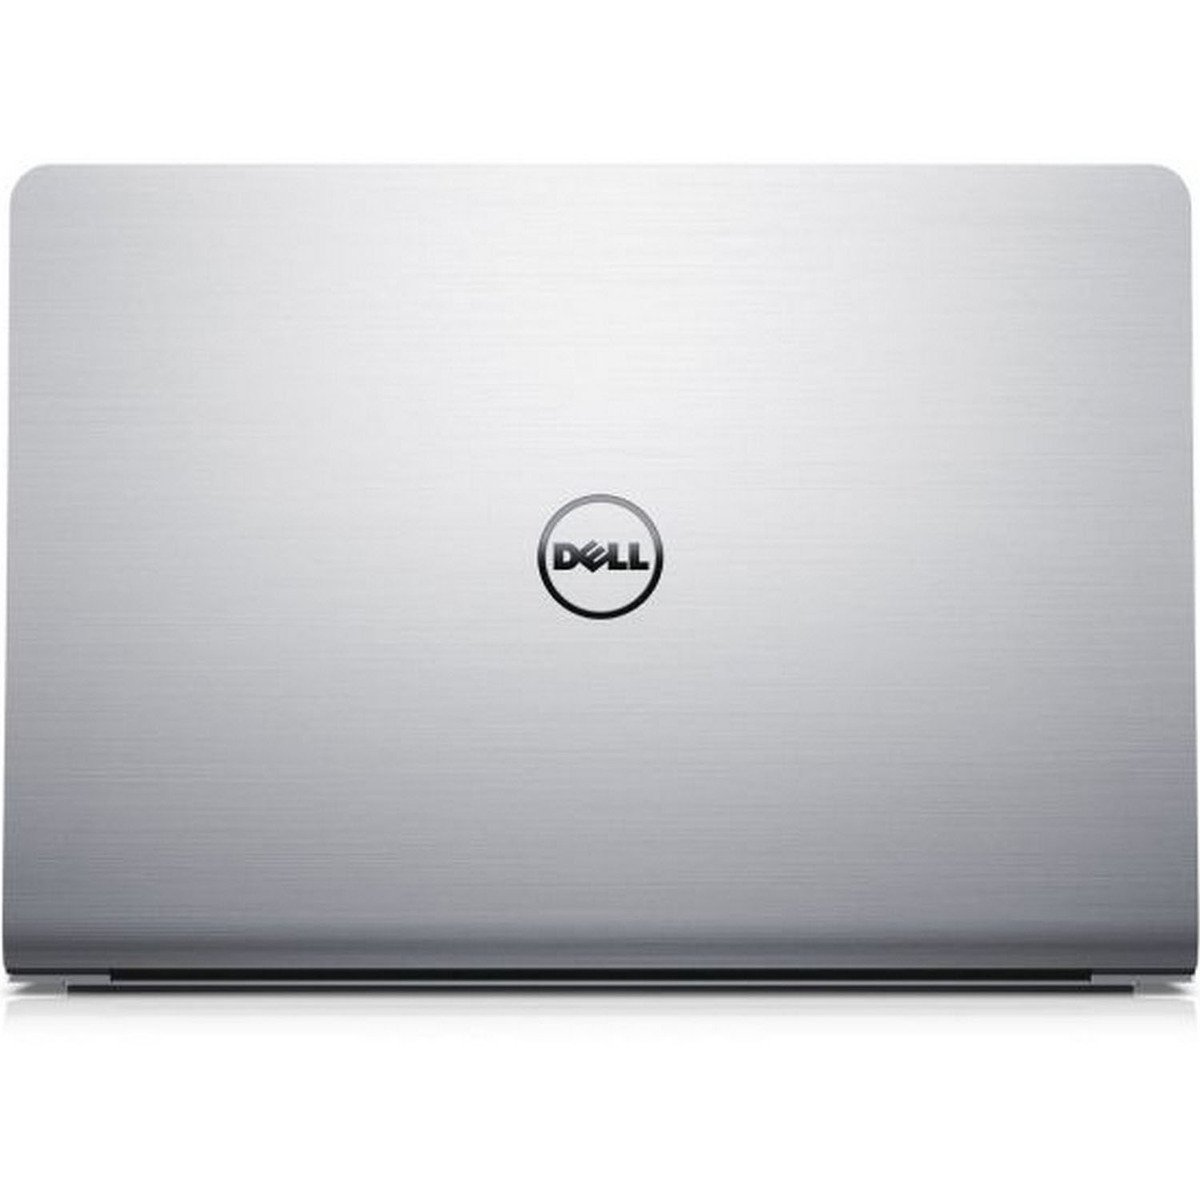 Dell Notebook 5468-VOS-1059 Core i5 Grey